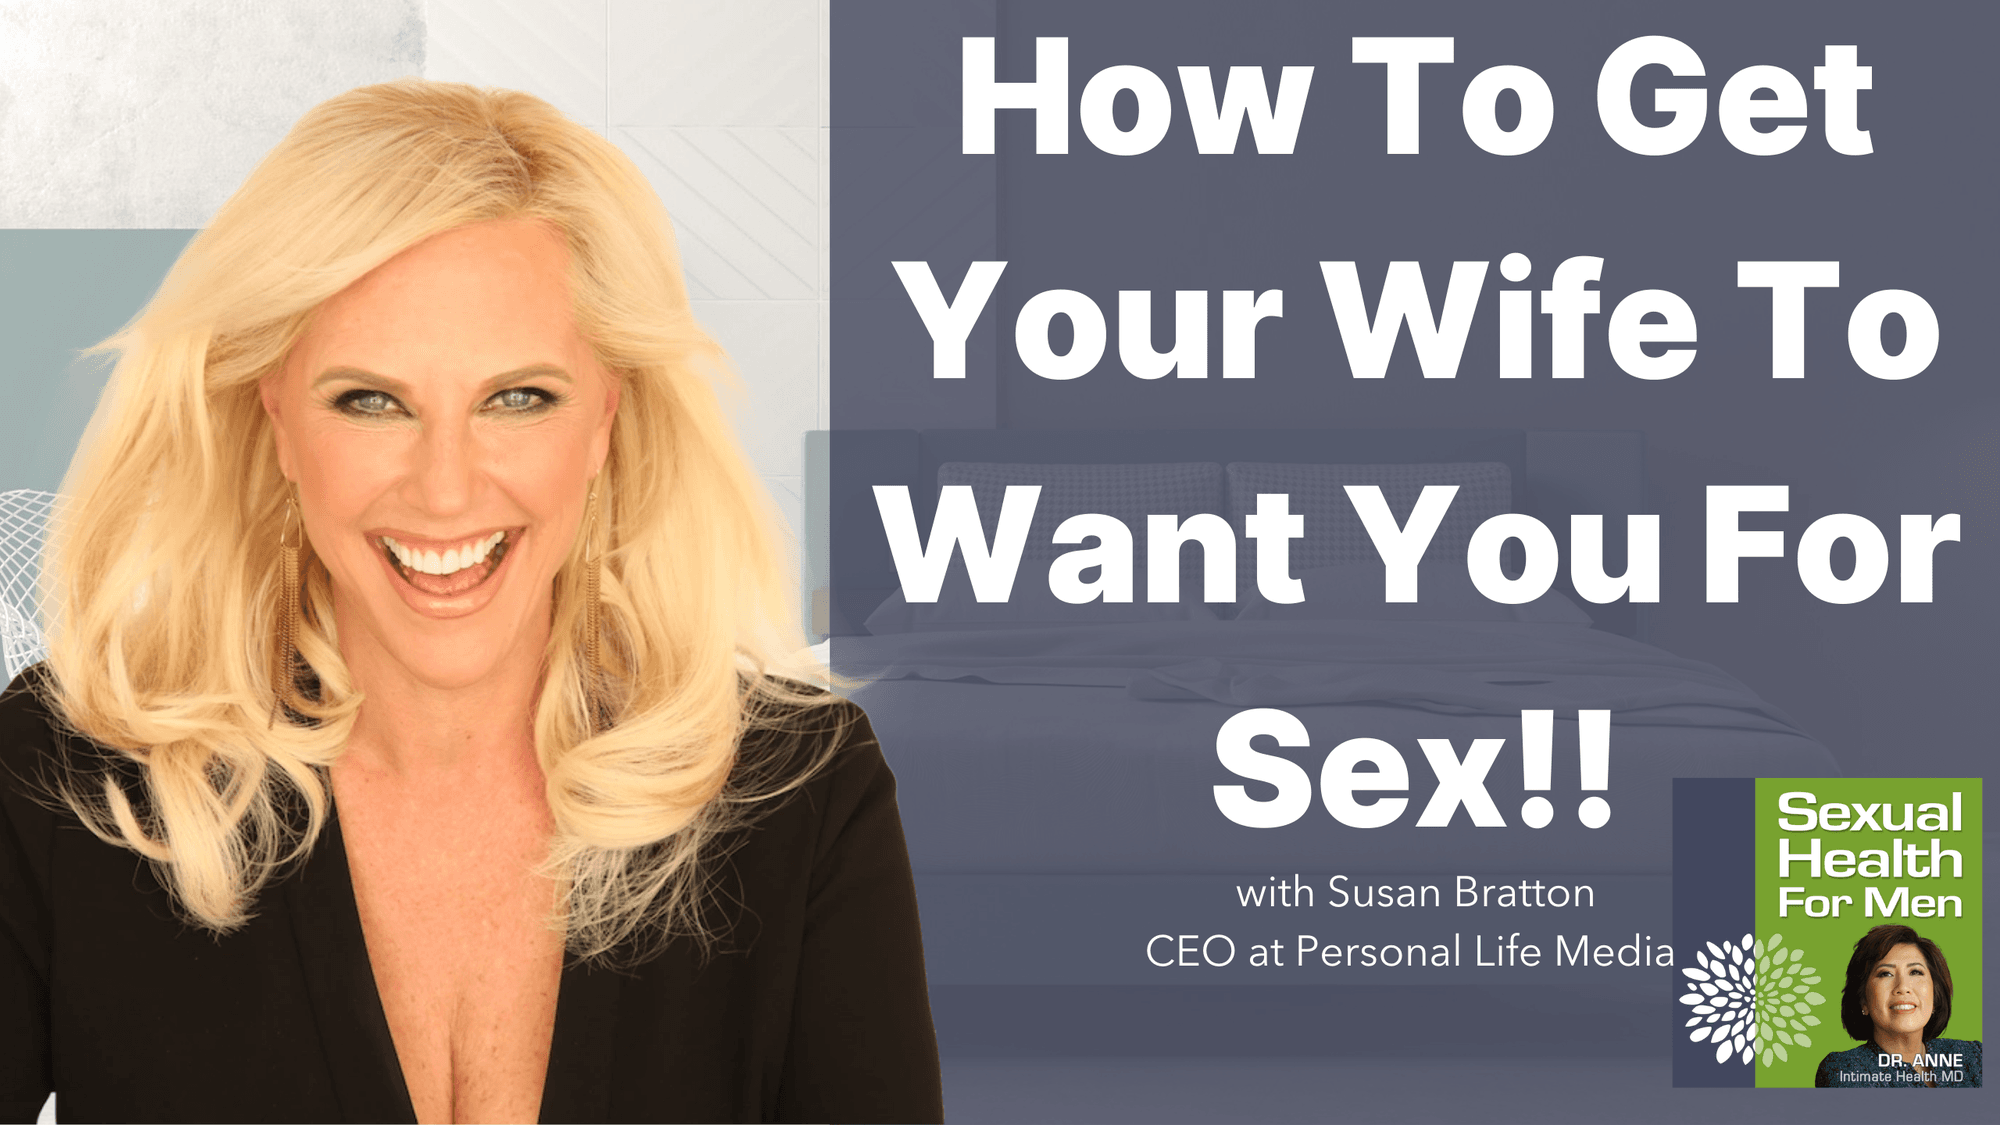 How To Get Your Wife To Want You For Sex!! cover